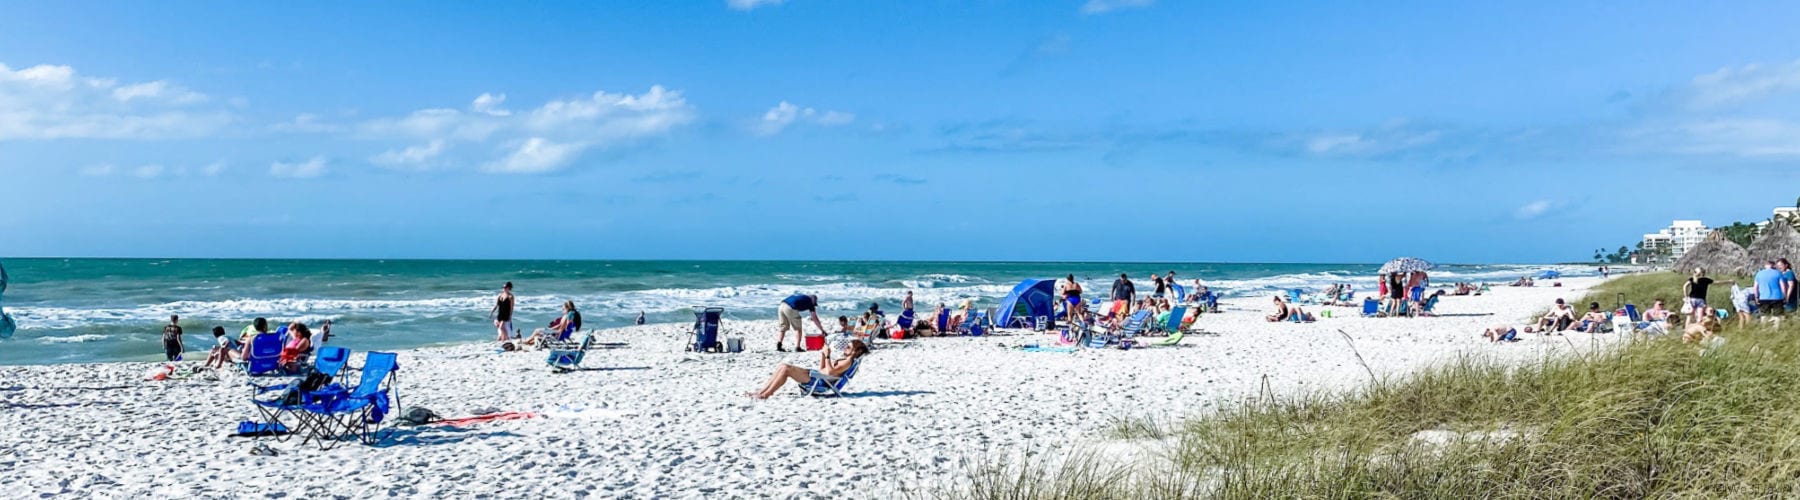 How to Plan a Family Trip to Florida on a Budget - We3Travel